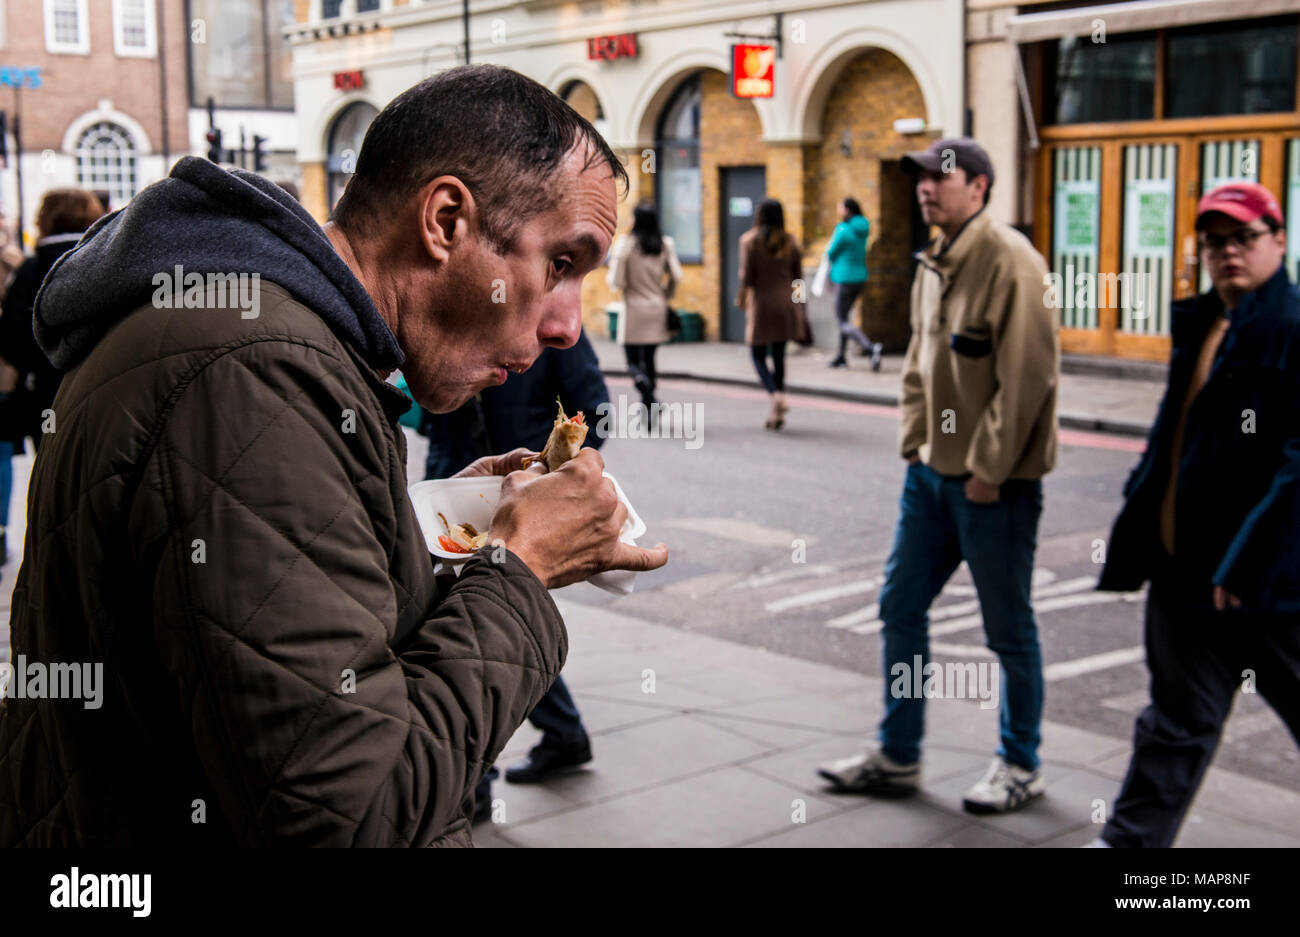 Man eating food from takeaway container near Borough Market, Southwark, London, England, UK Stock Photo